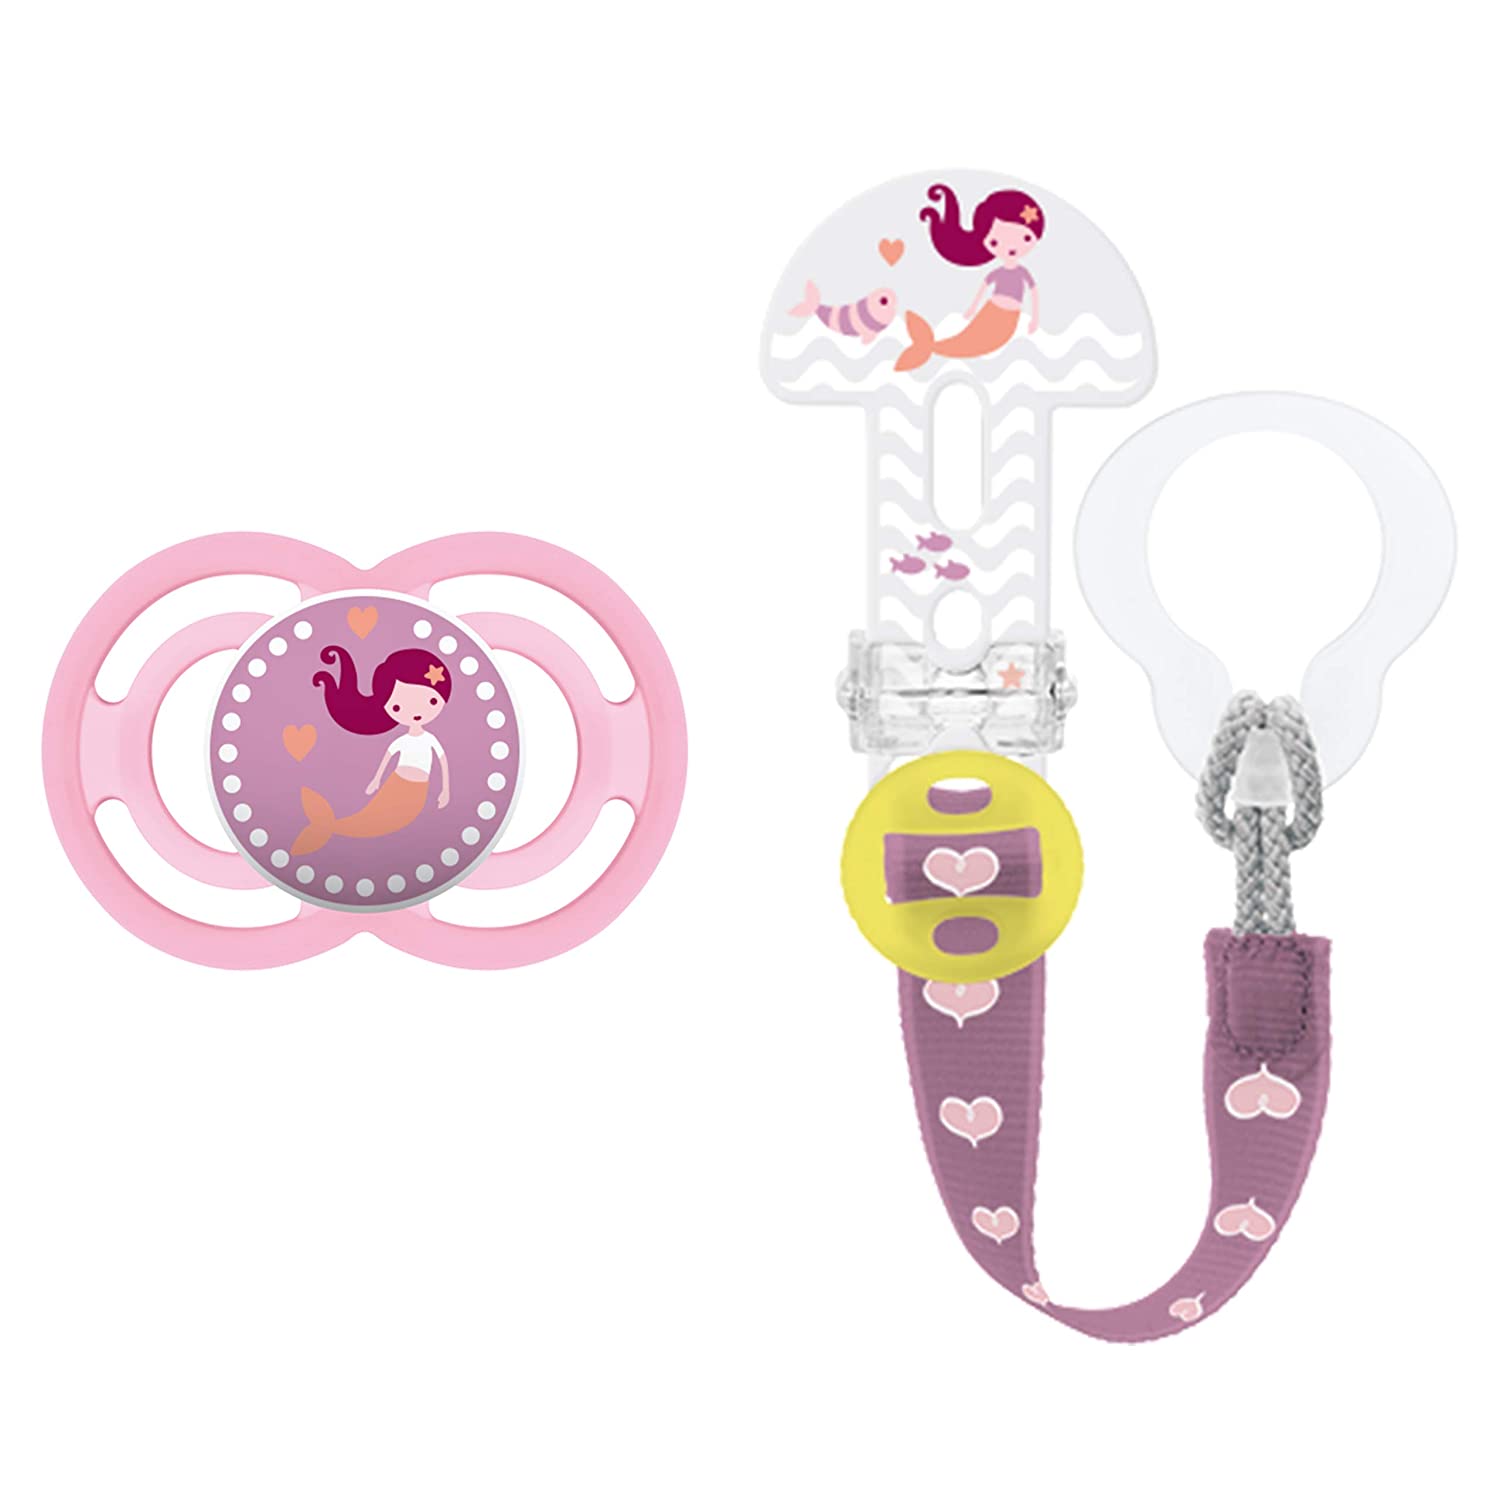 MAM Perfect Dummy and Clip It! Dummy Clip, Baby Pacifier Prevents Tooth Misalignment, Dummy Holder Suitable for Dummy and Teething Rings, 6-16 Months, Mermaid